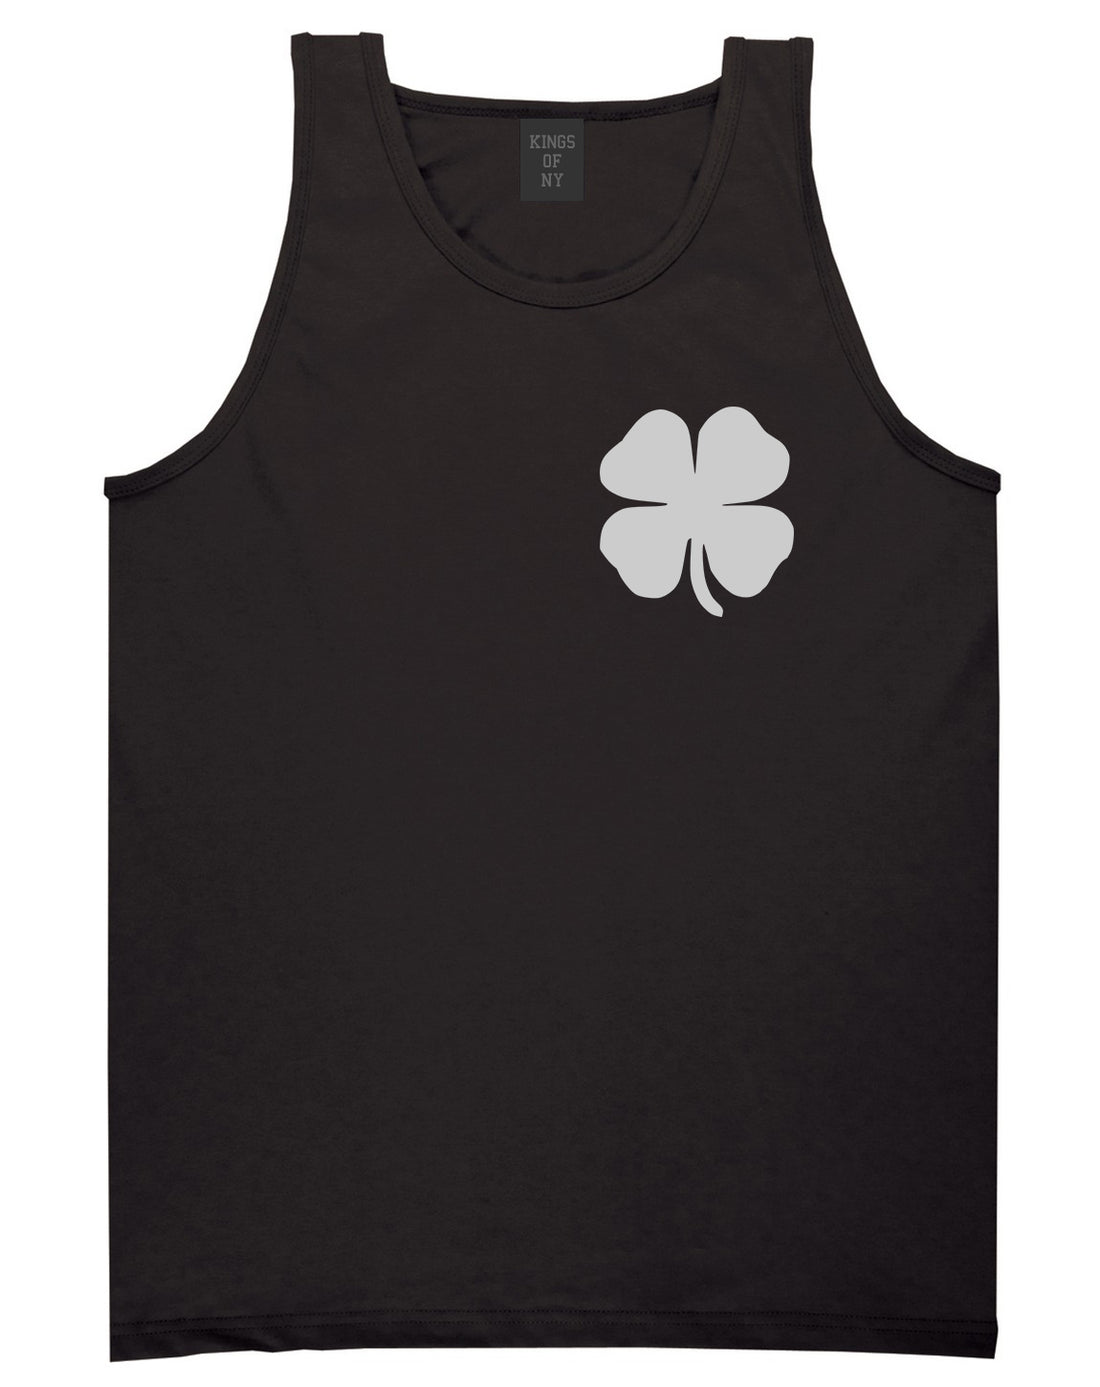 Four Leaf Clover Chest Black Tank Top Shirt by Kings Of NY